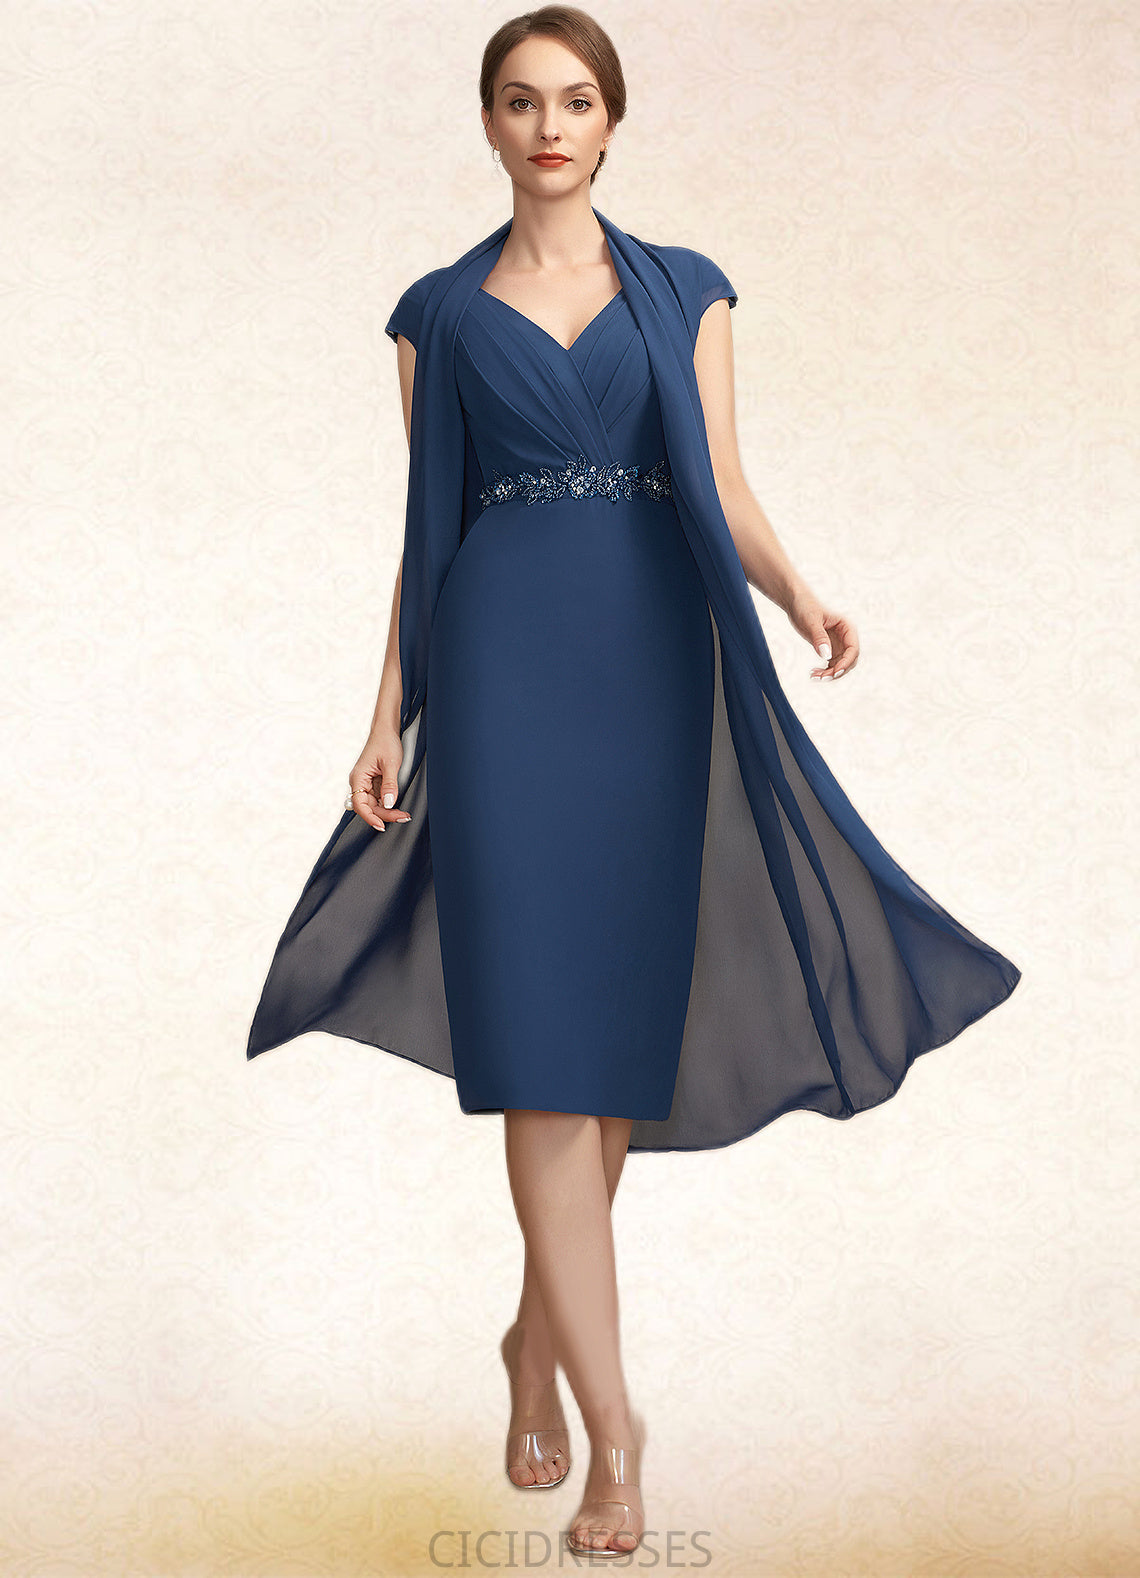 Lorna Sheath/Column V-neck Knee-Length Chiffon Mother of the Bride Dress With Ruffle Beading Sequins CIC8126P0014847